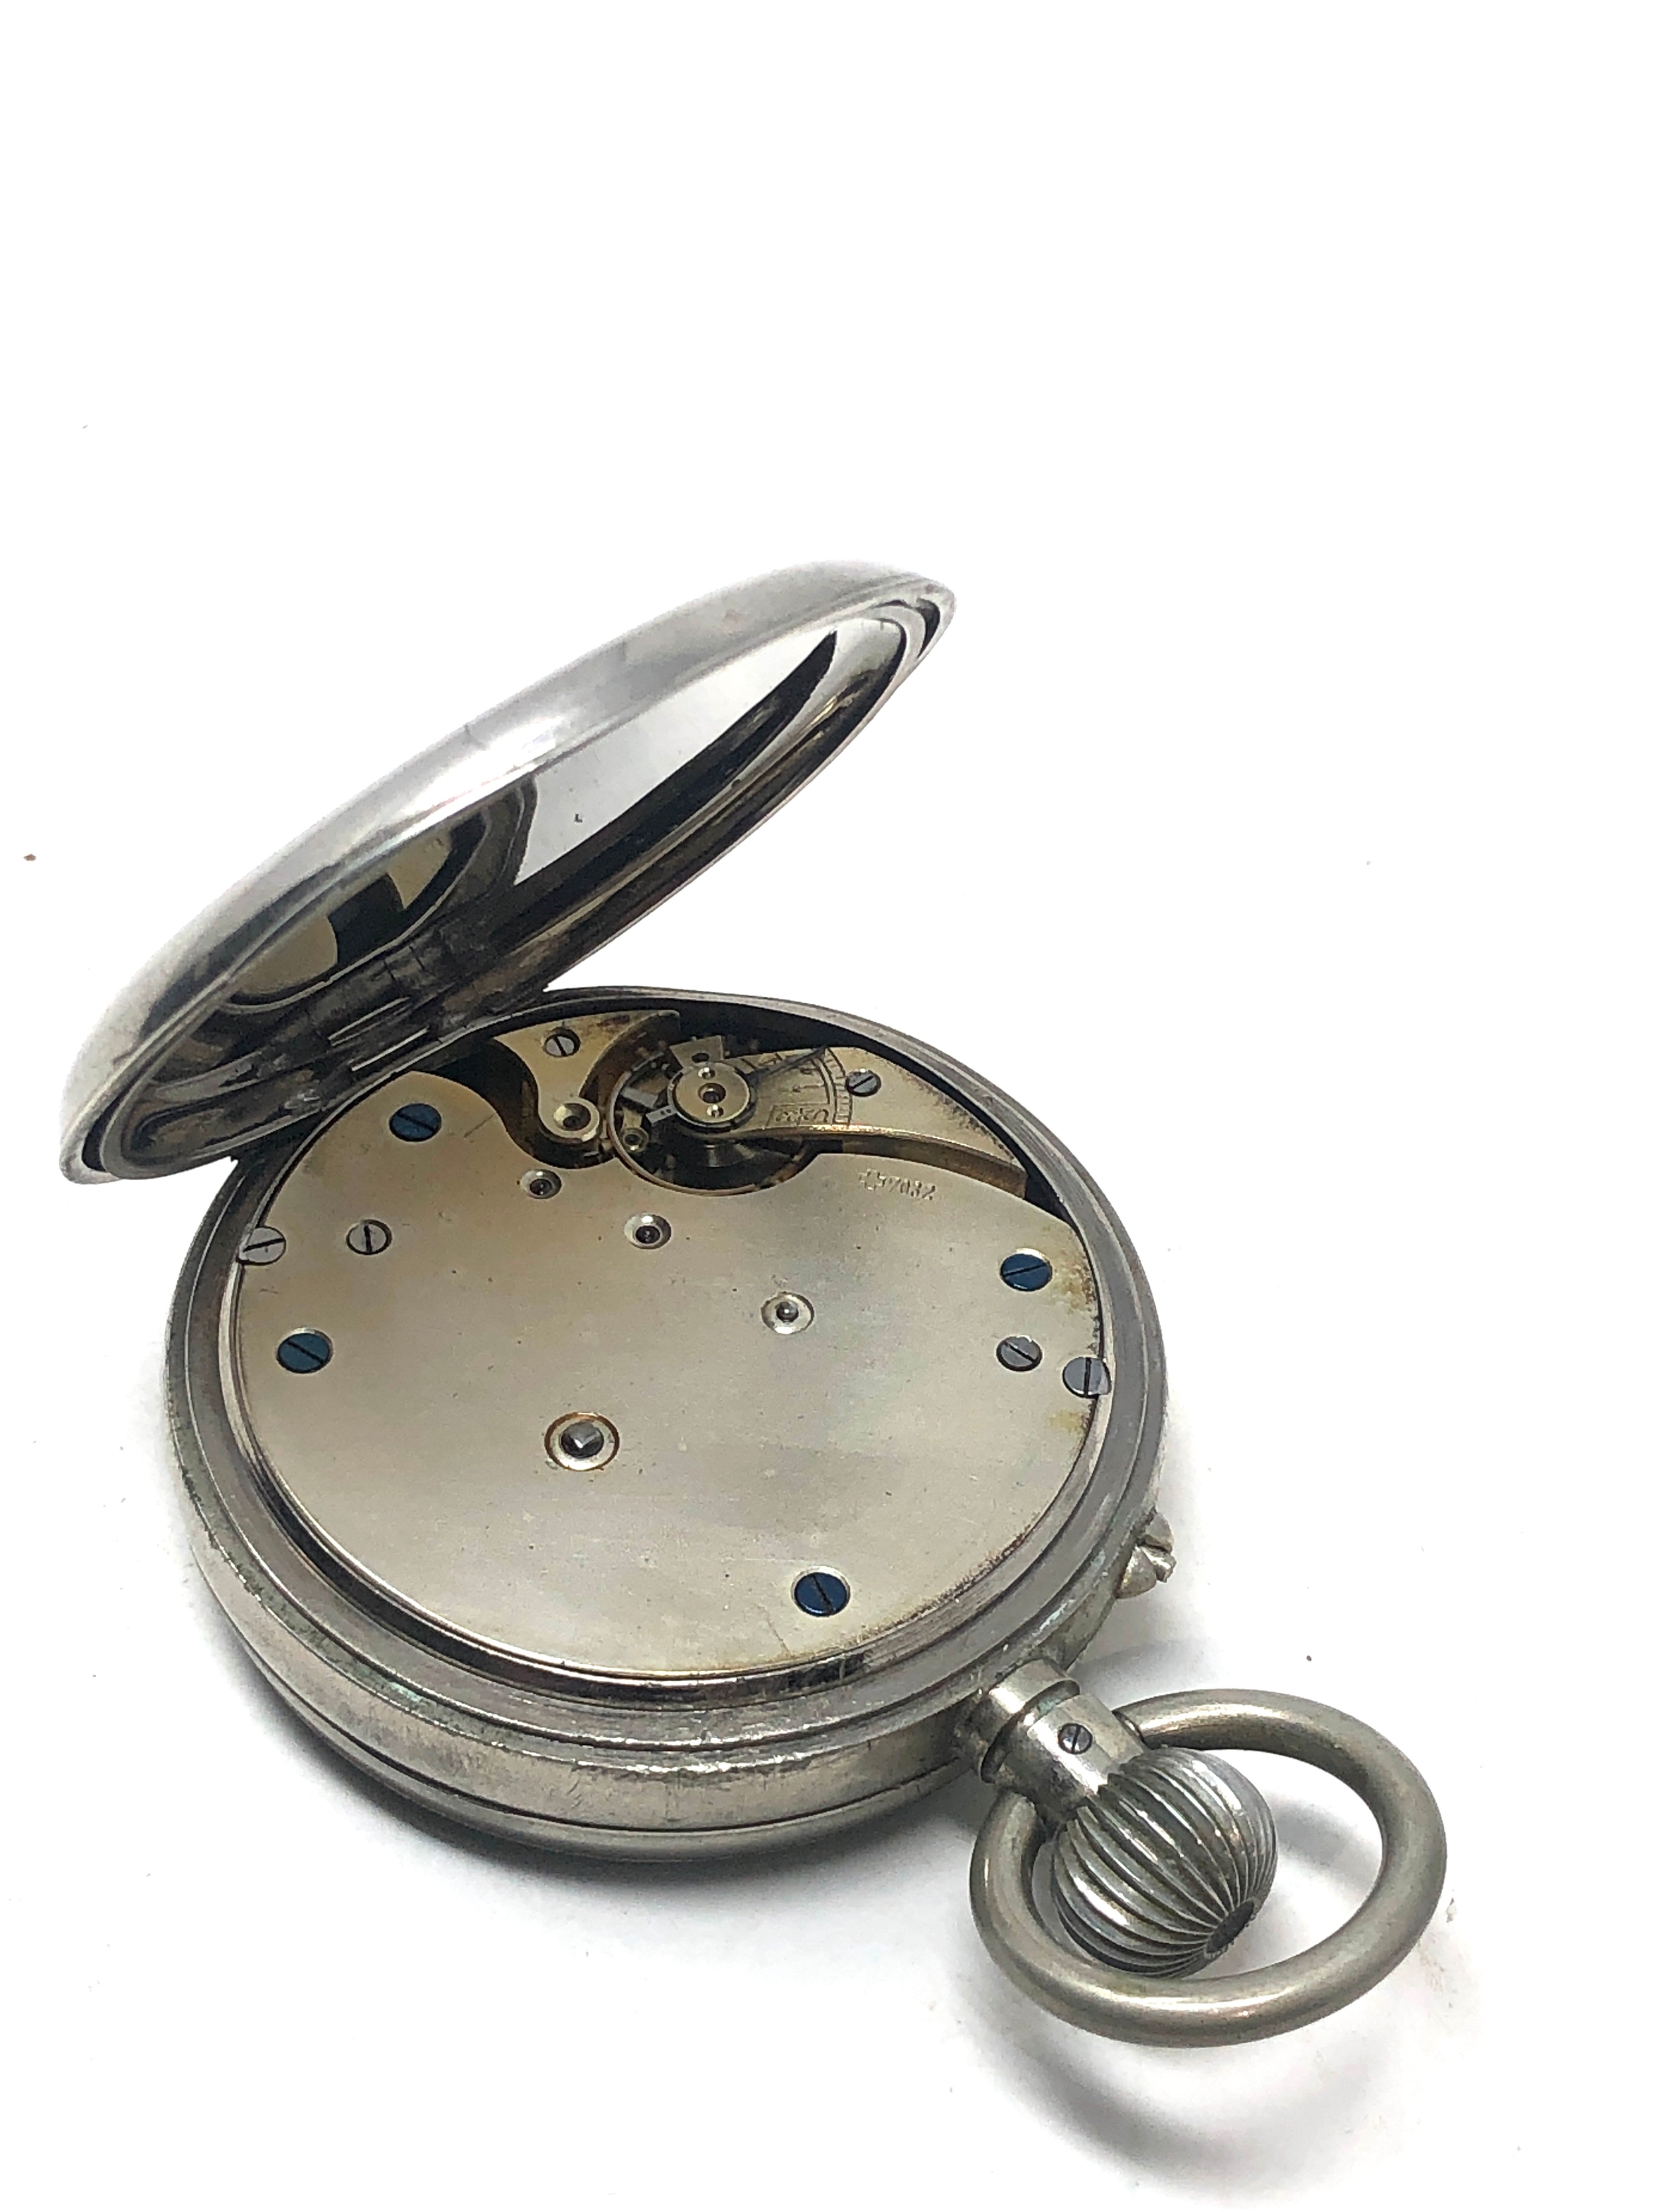 Antique 8 day goliath pocket watch the watch is ticking - Image 3 of 3